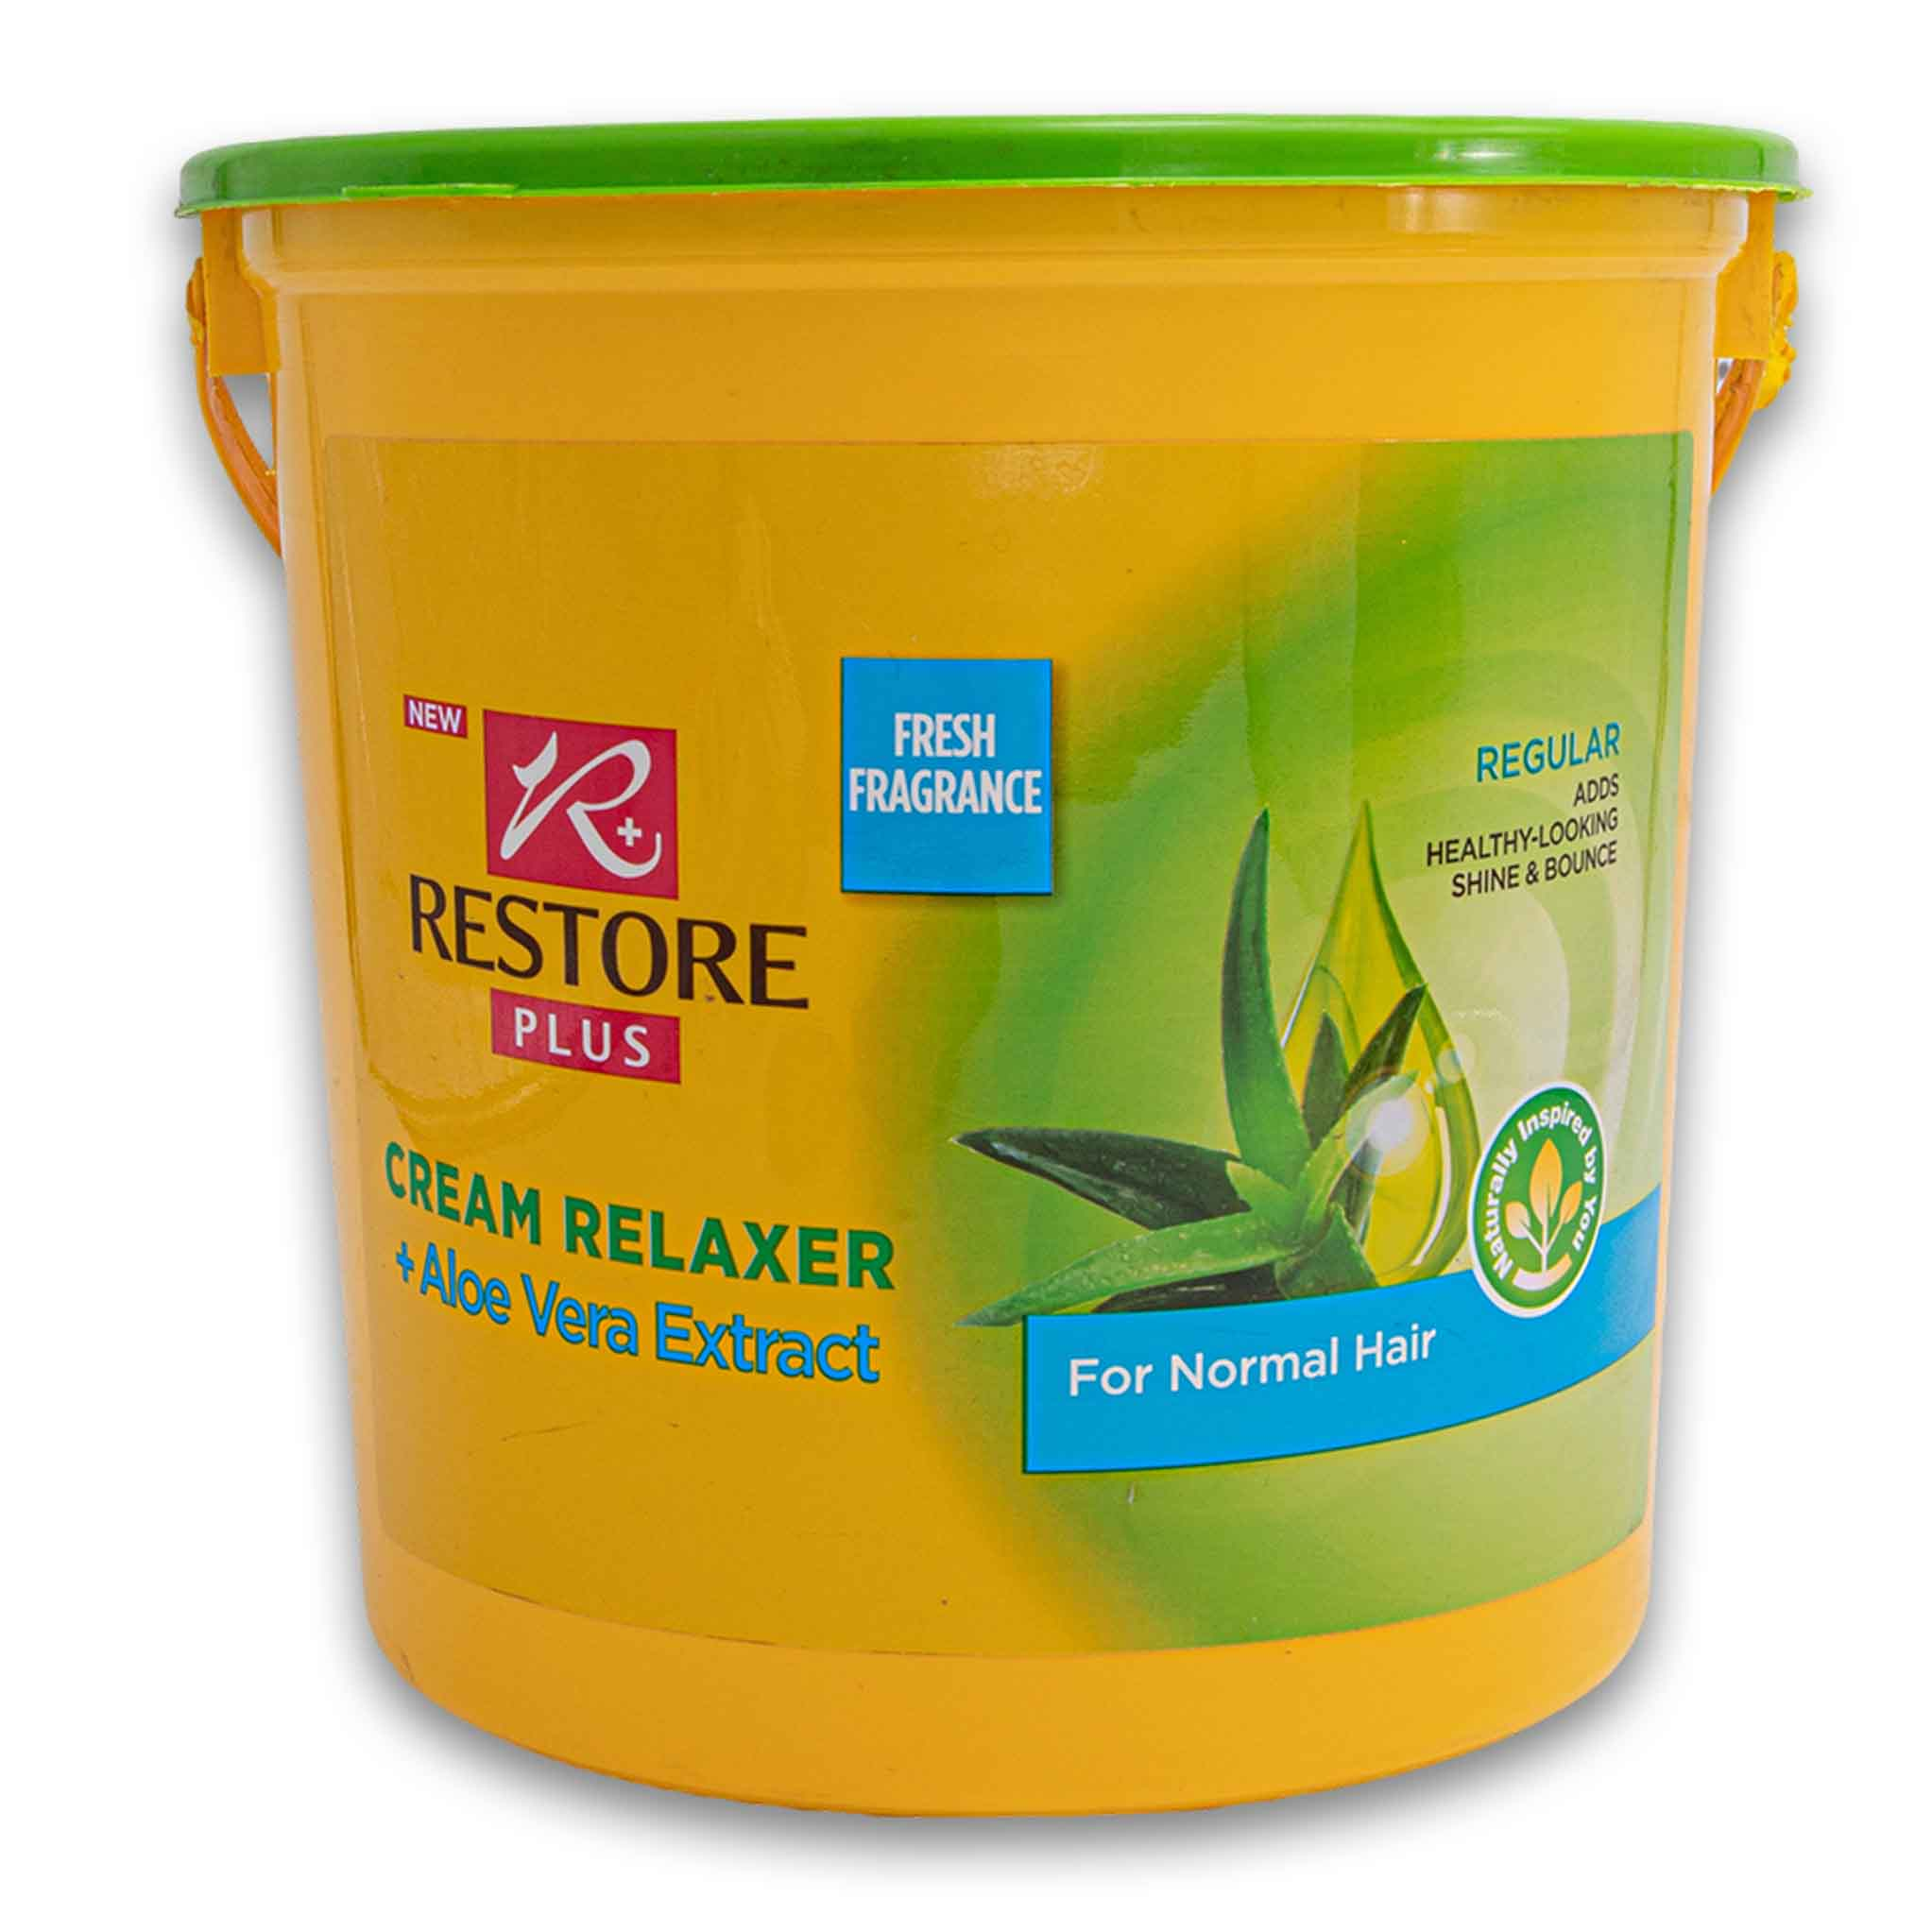 Cream Relaxer Regular 5L made with Aloe Vera Extract for Normal Hair